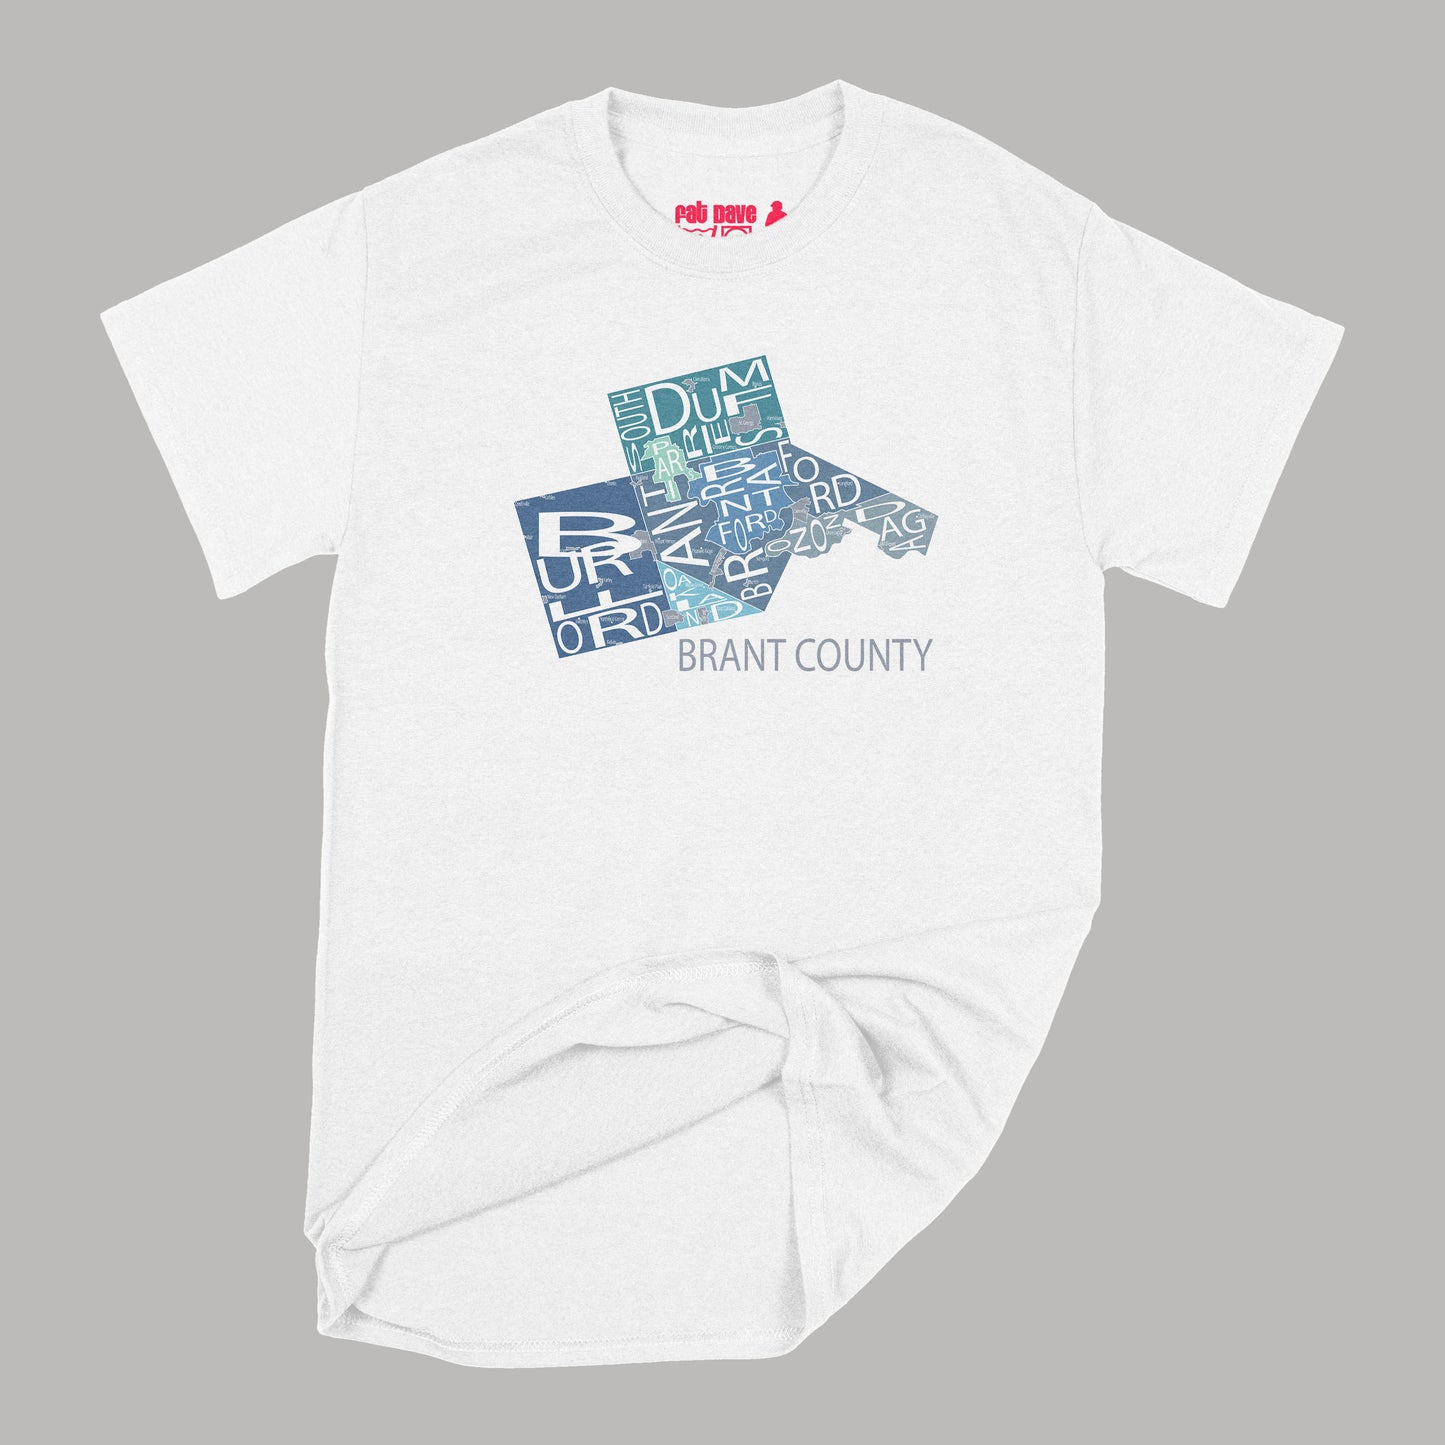 All Over The Map Studios Brant County T-Shirt